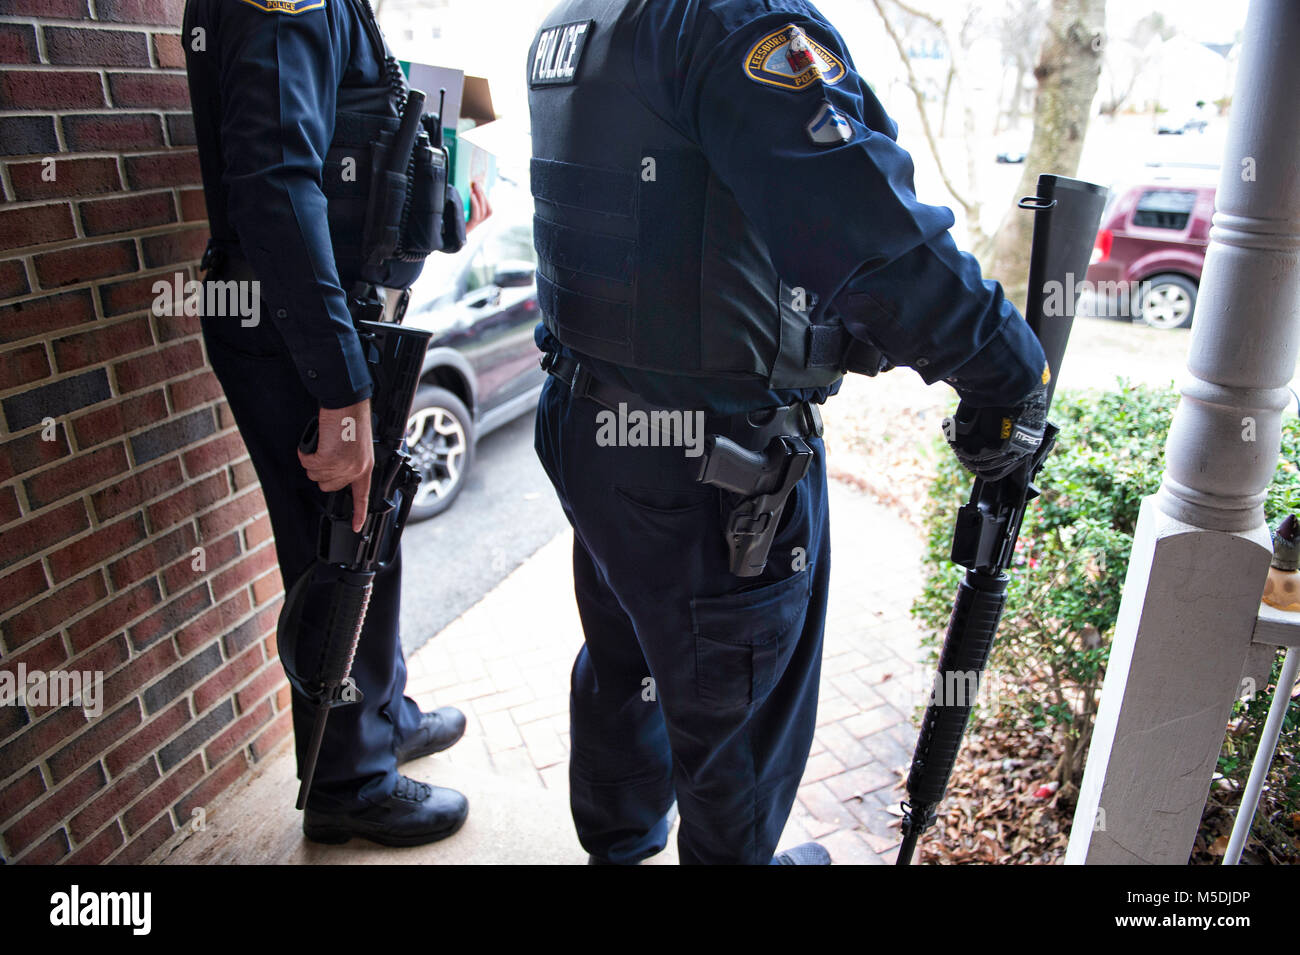 Leesburg, Virginia, USA. 22nd Feb, 2018. A Leesburg veteran surrendered two AR-15's today to the Leesburg Police Department. Here LPD officers removed the guns from the home, two AR-15's with about 3000 rounds of ammunition, 2 dozen high capacity magazines and other assault rifle accessories. They will be destroyed and not put back into circulation. Credit: William Graham/Alamy Live News Stock Photo